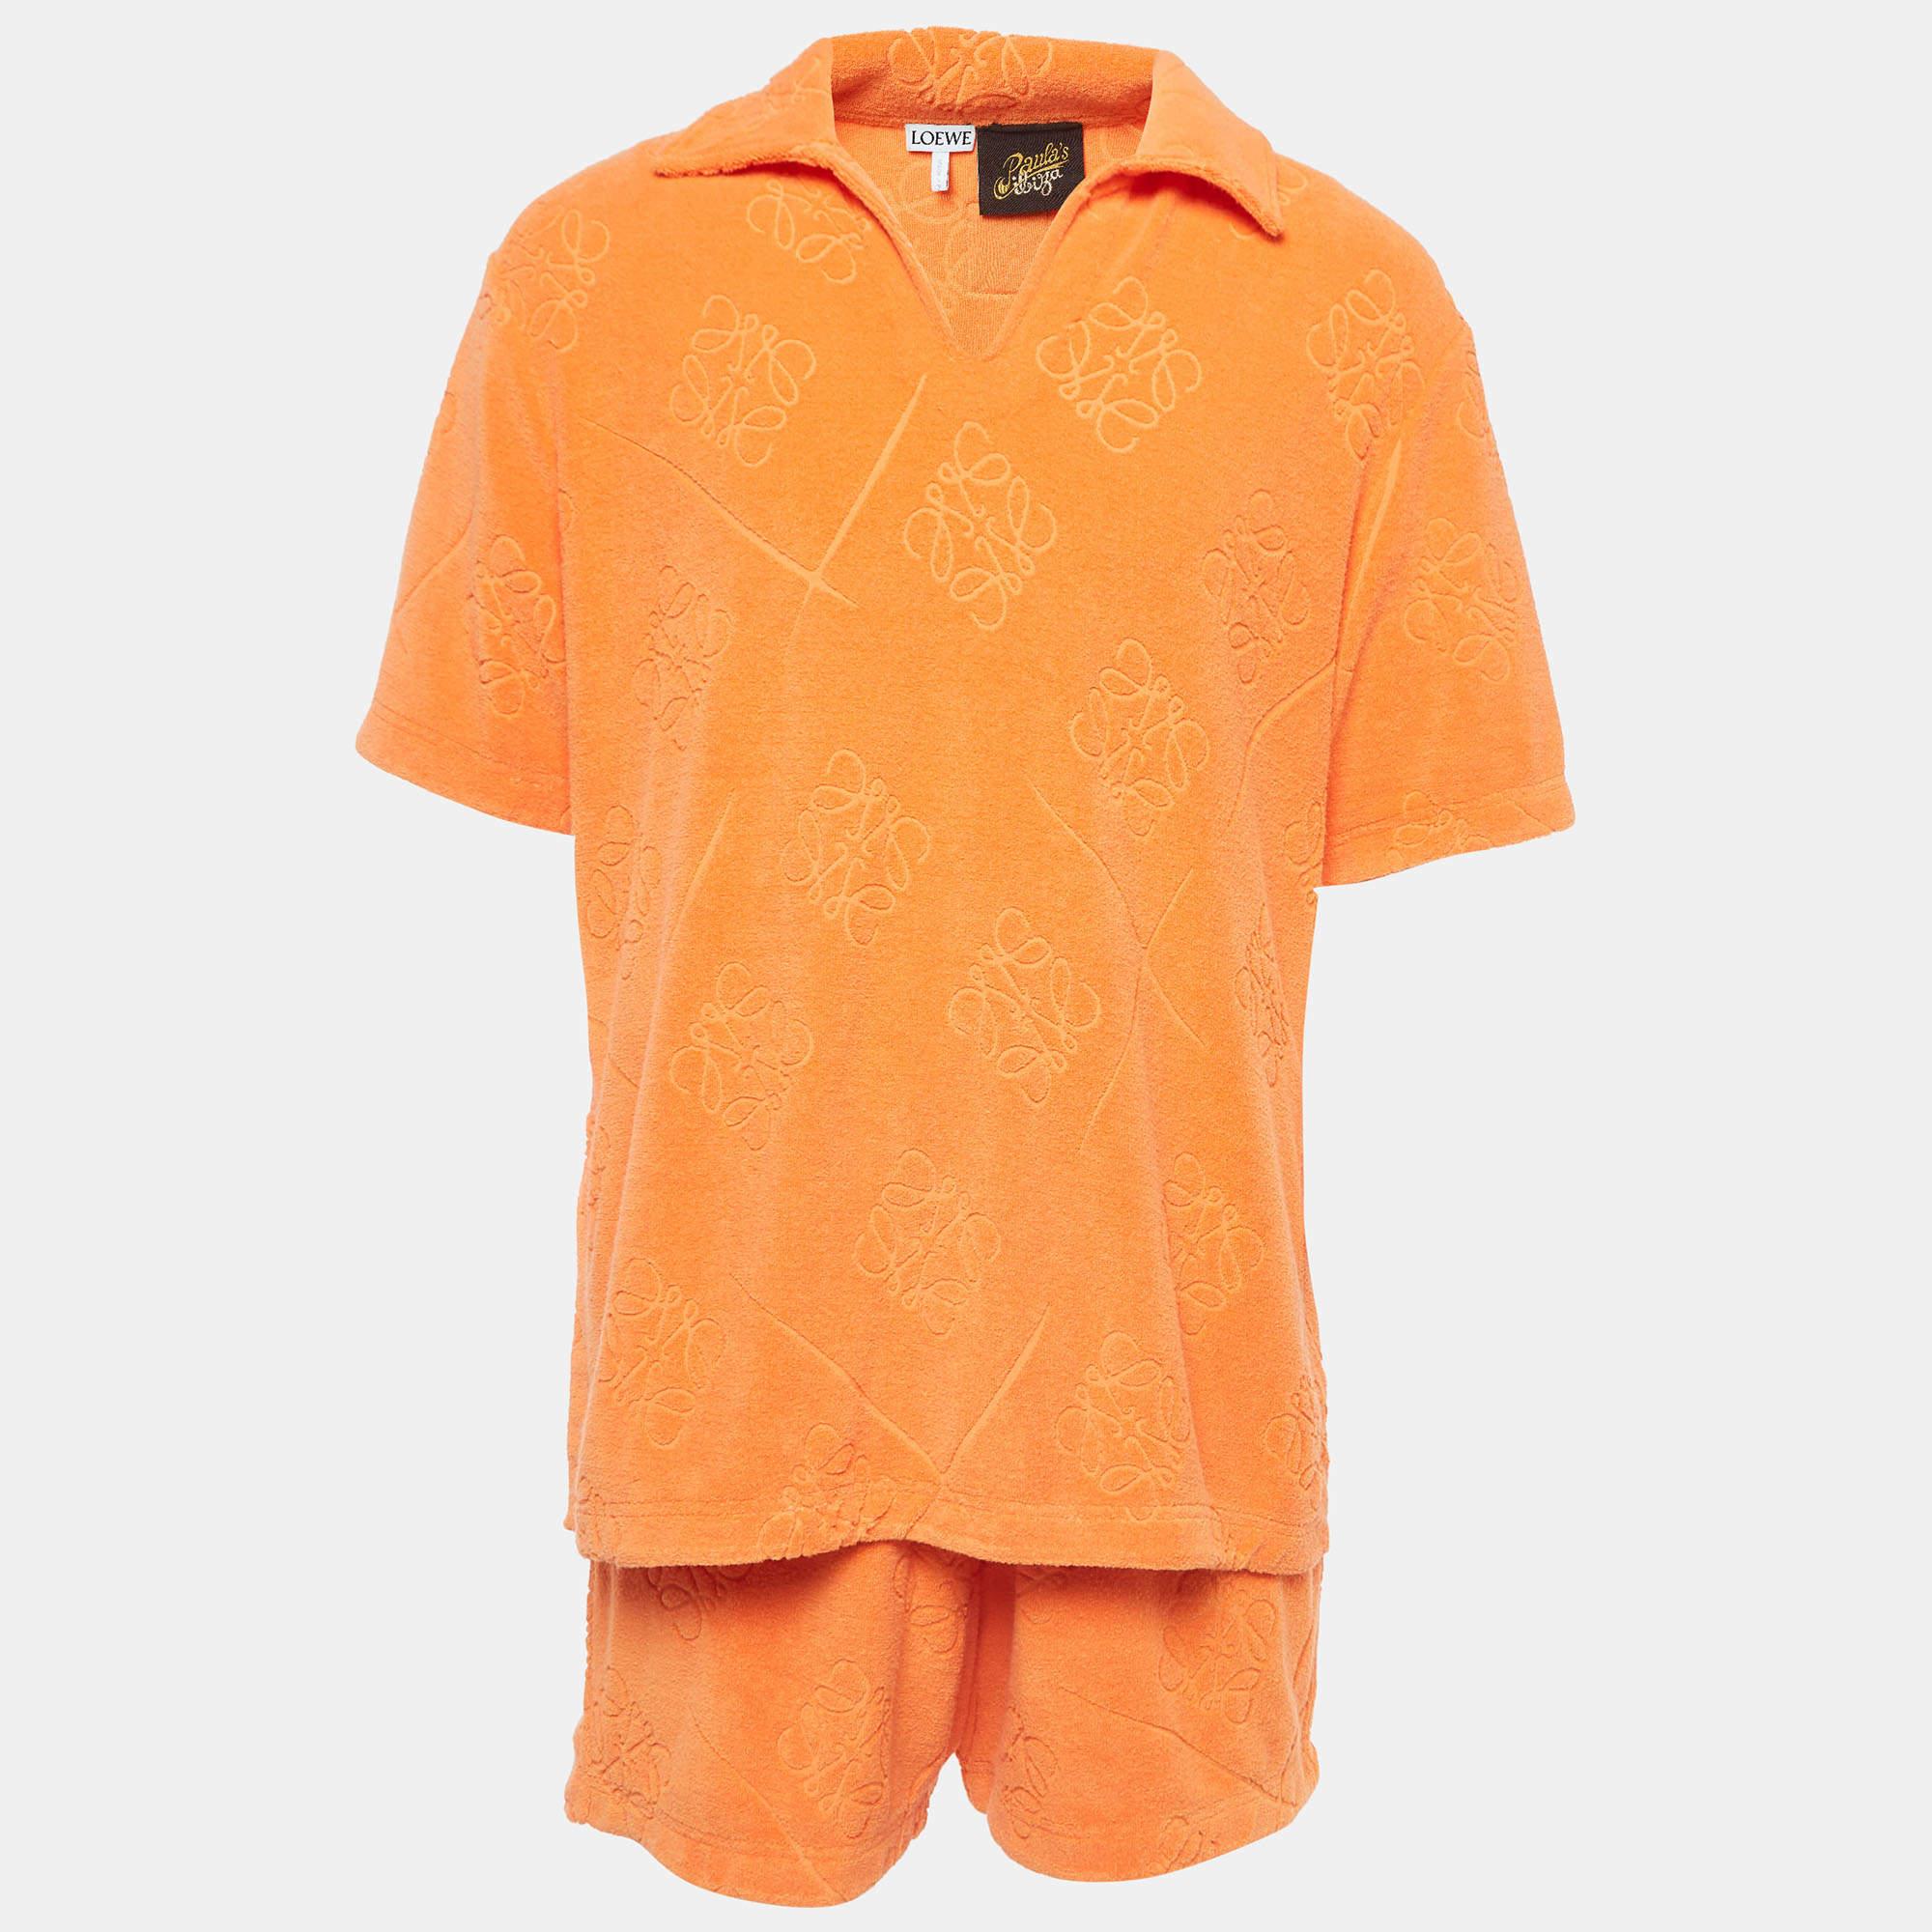 Loewe x Paula Ibiza collection is crafted with playful details and trendy colors. Crafted from terry cotton, this shirt & shorts set features orange anagram , short sleeves and a relaxed silhouette.

